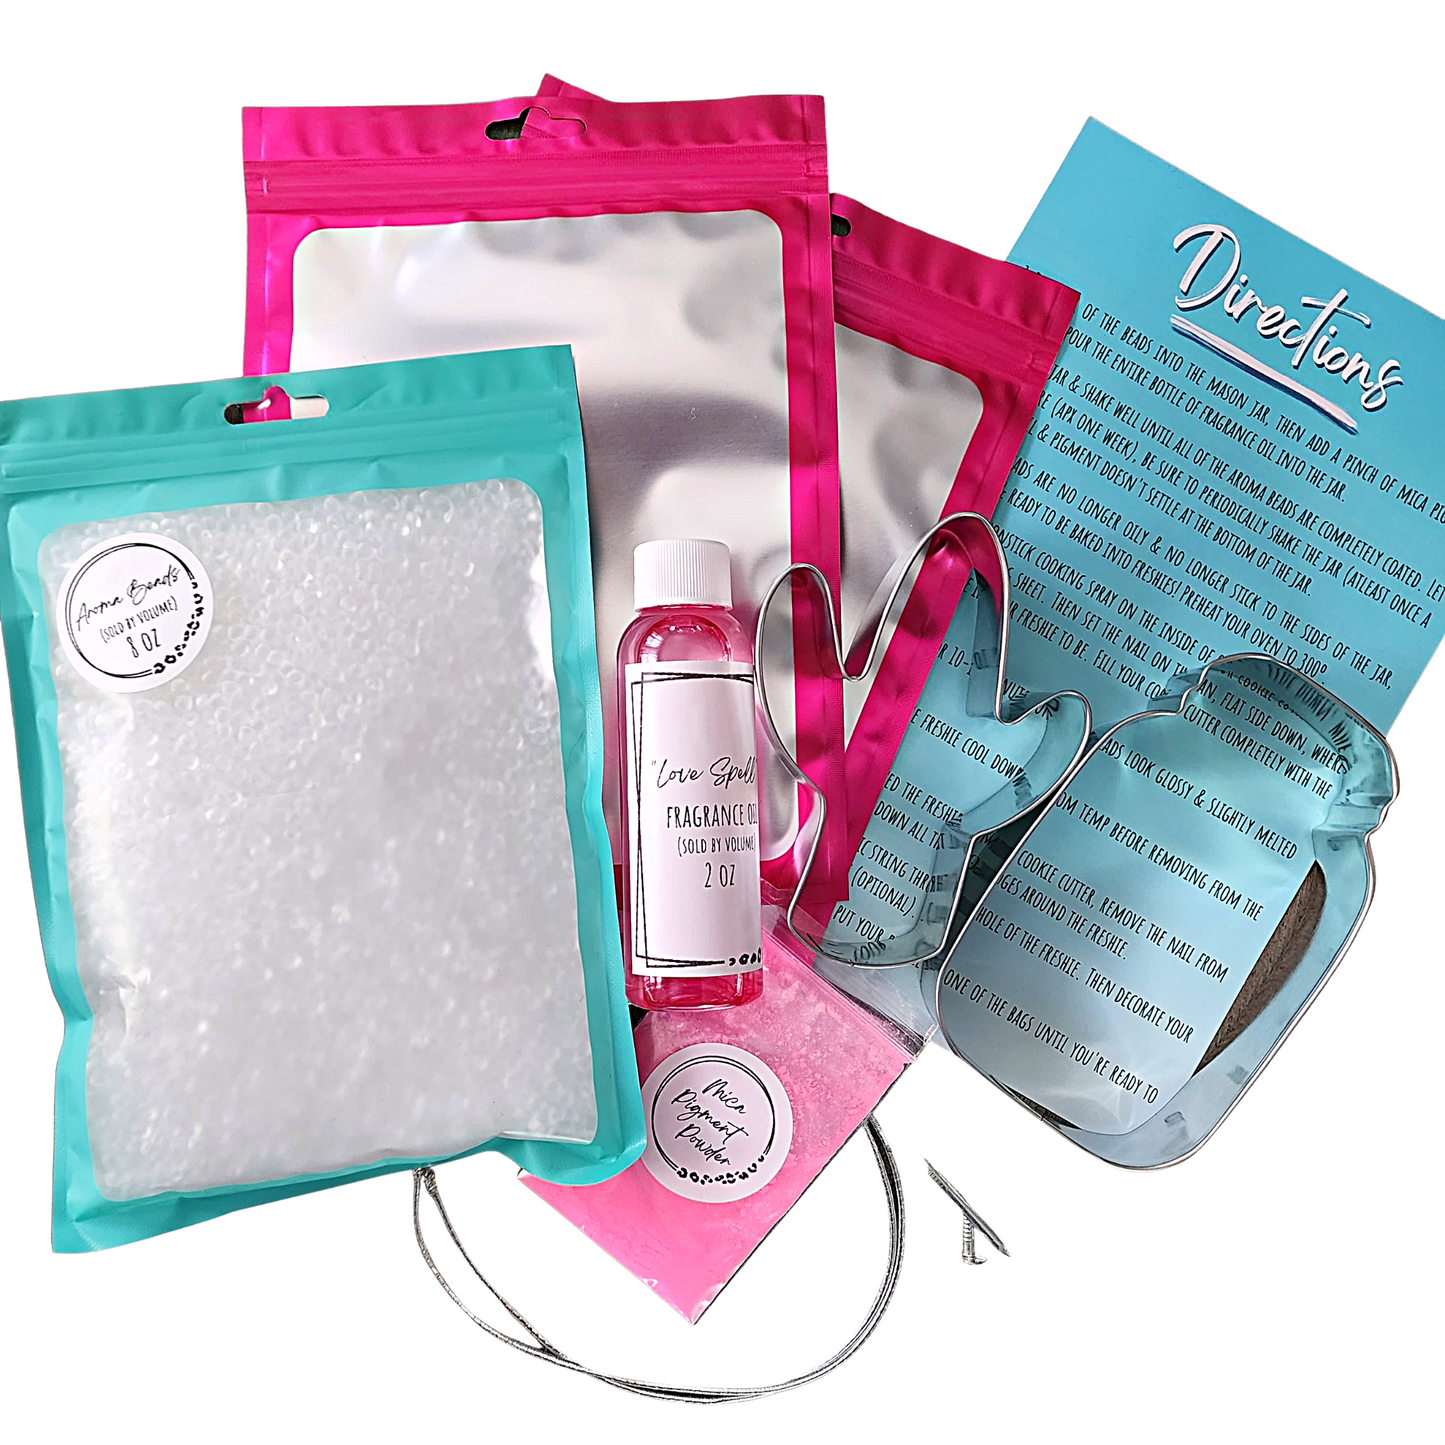 Small Unscented Aroma Beads Freshie Starter Kit (Makes 12-20 freshies)